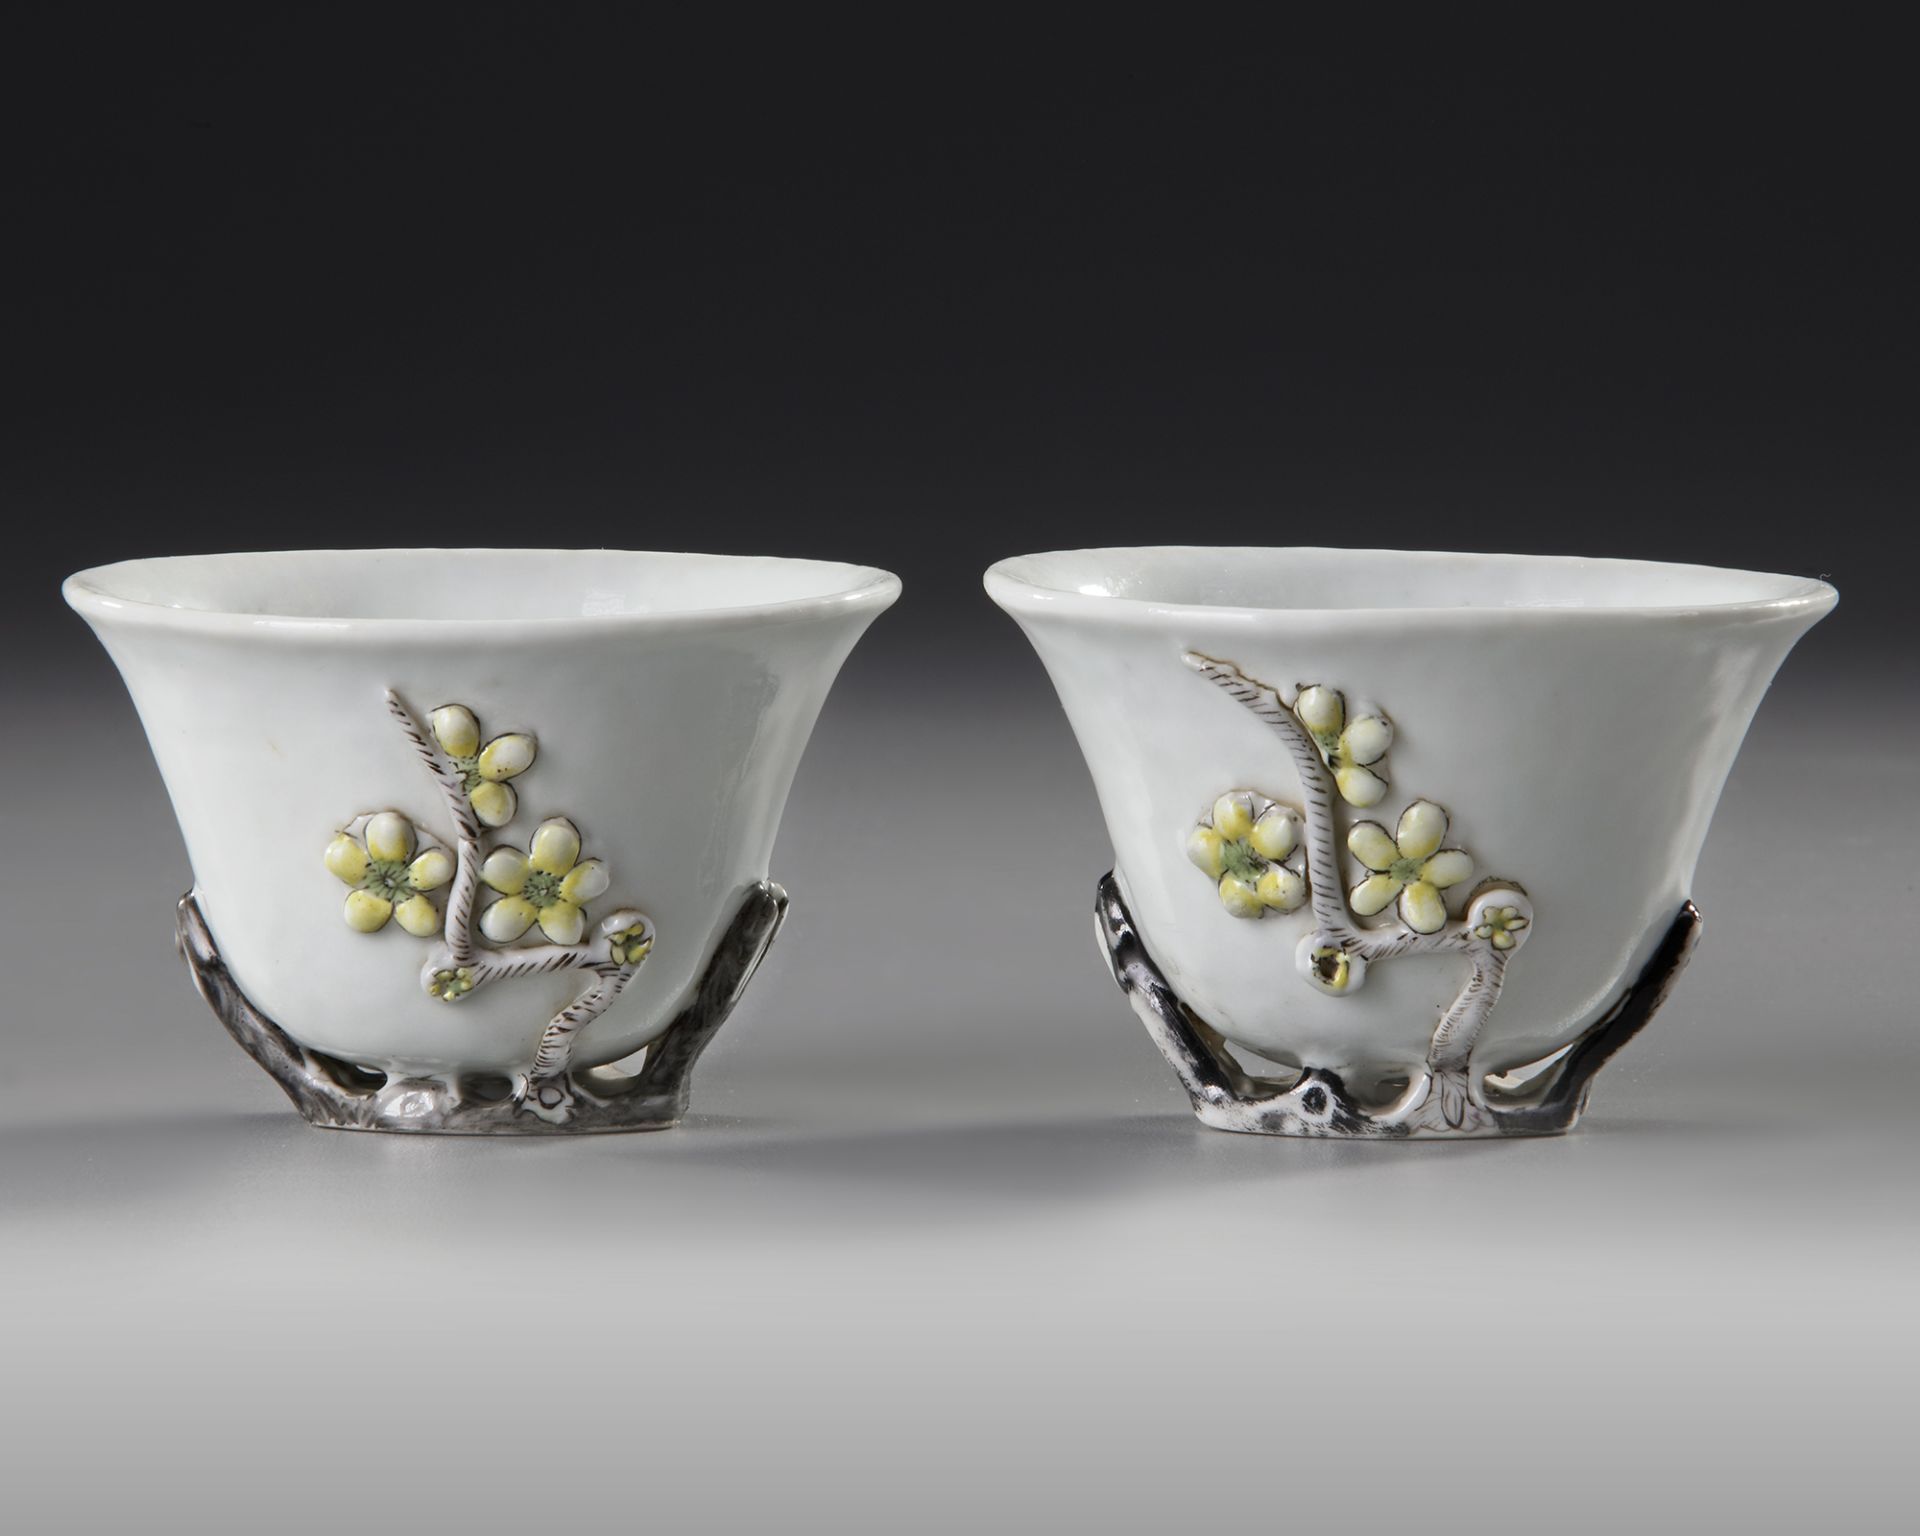 A PAIR OF CHINESE BLANC DE CHINE WINE CUPS, 18TH CENTURY